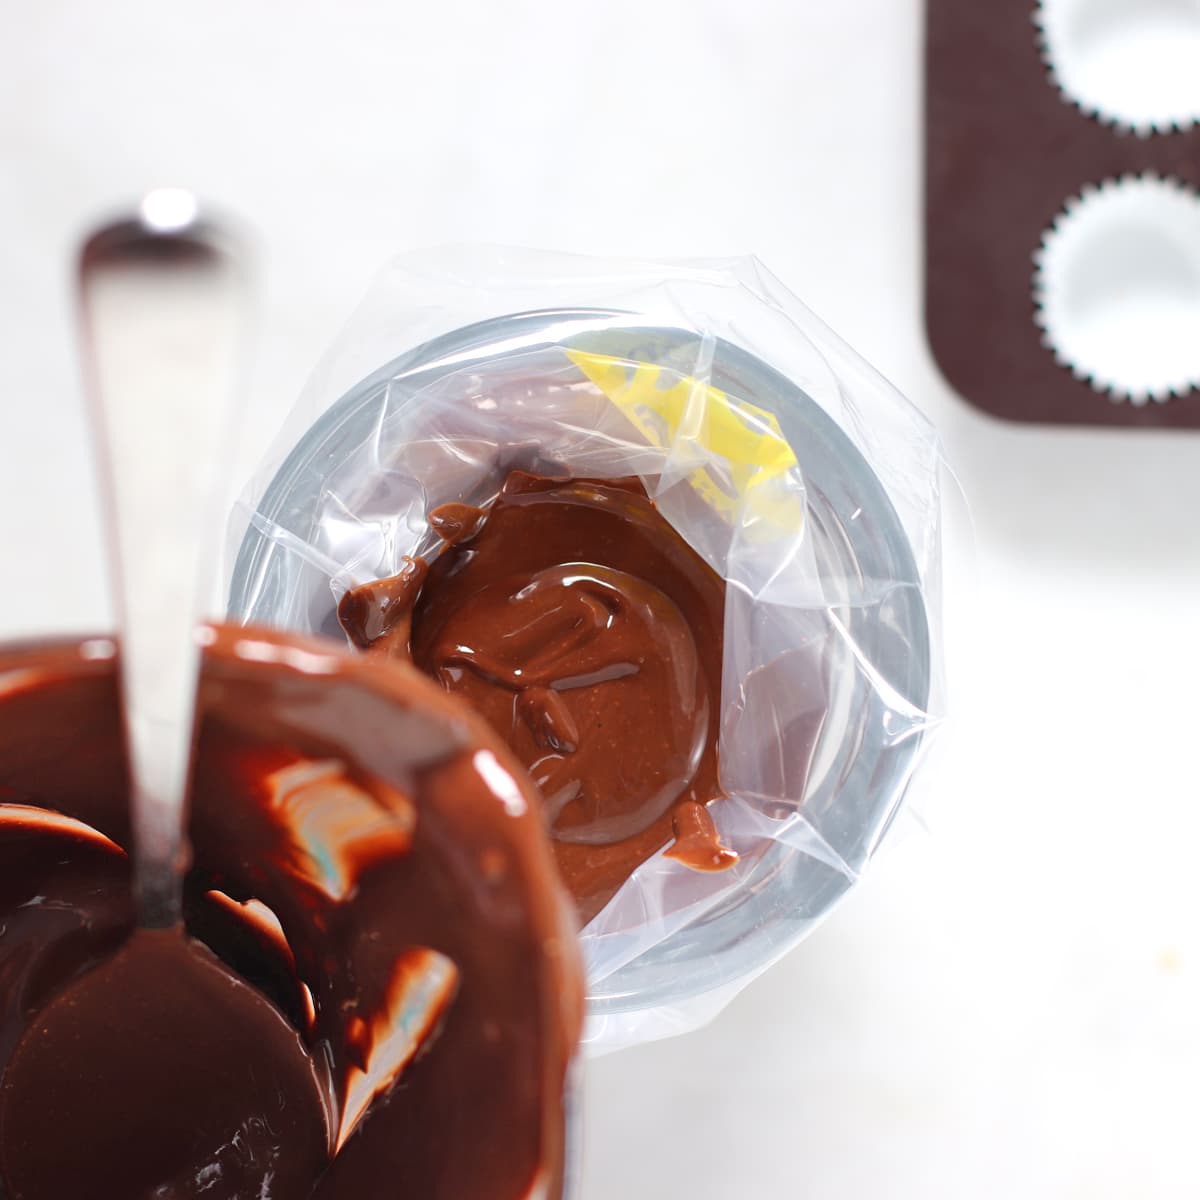 pouring fudge into a piping bag.